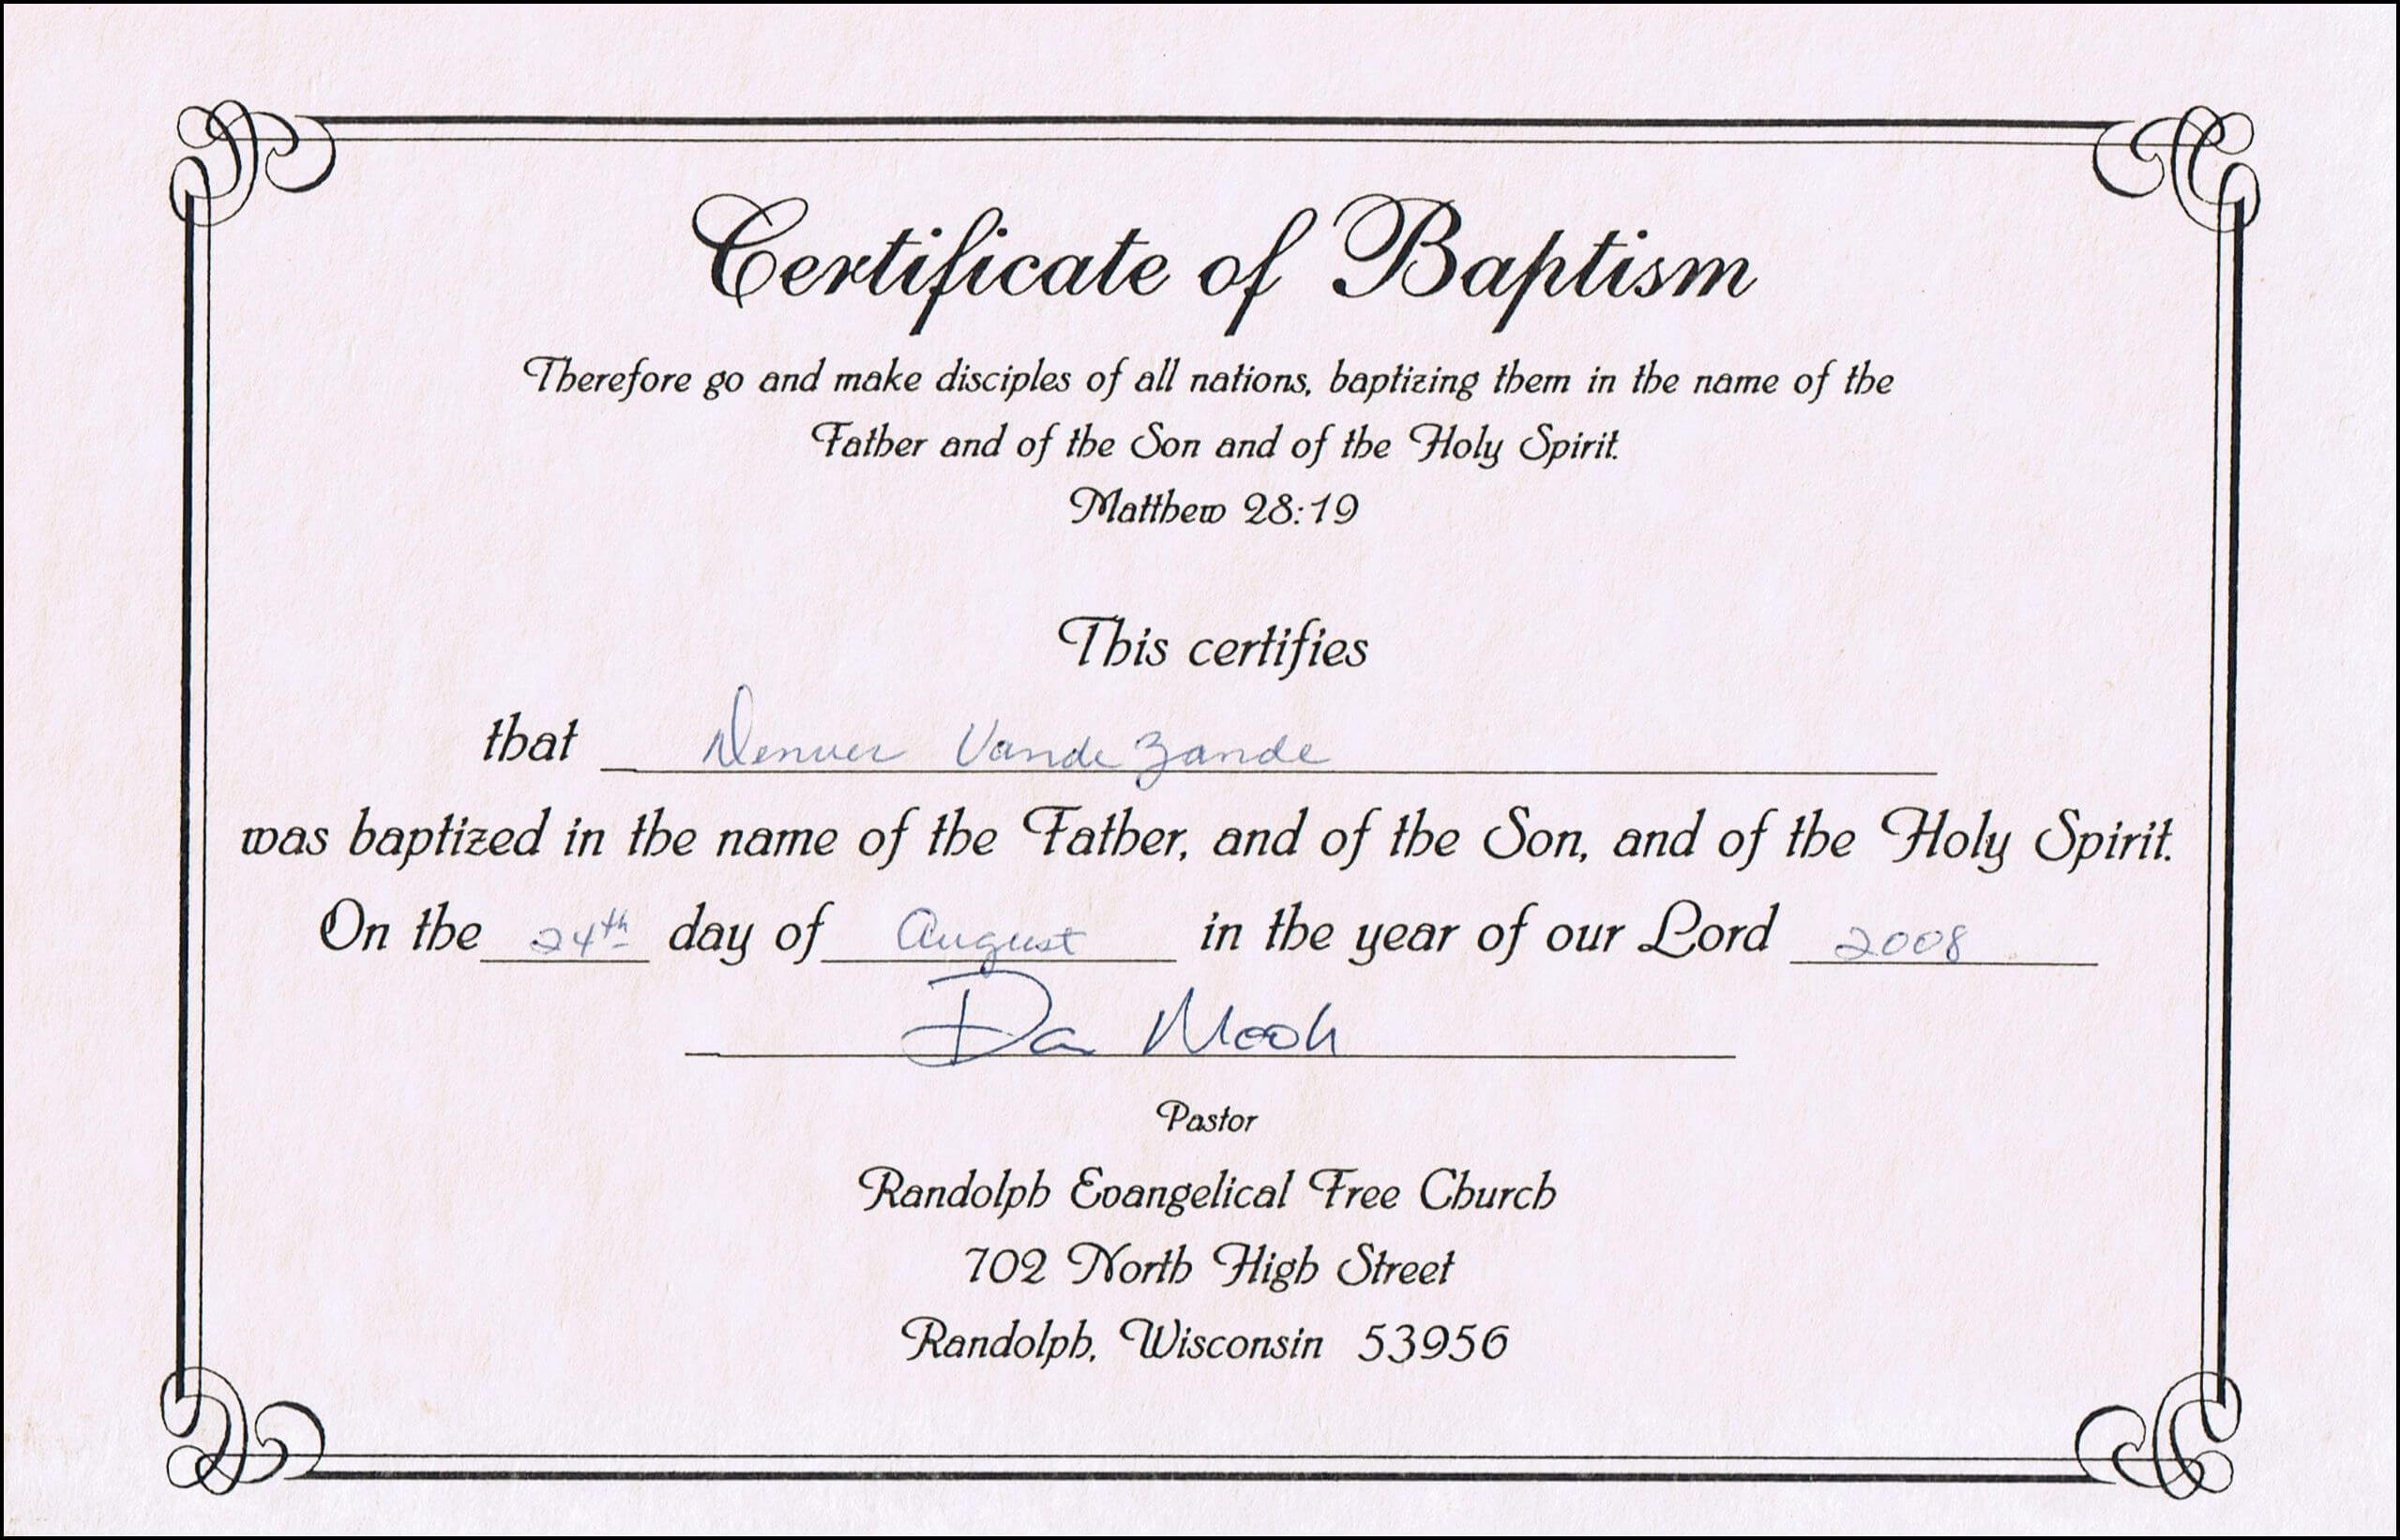 004 Certificate Of Baptism Template Ideas Unique Broadman Intended For Roman Catholic Baptism Certificate Template